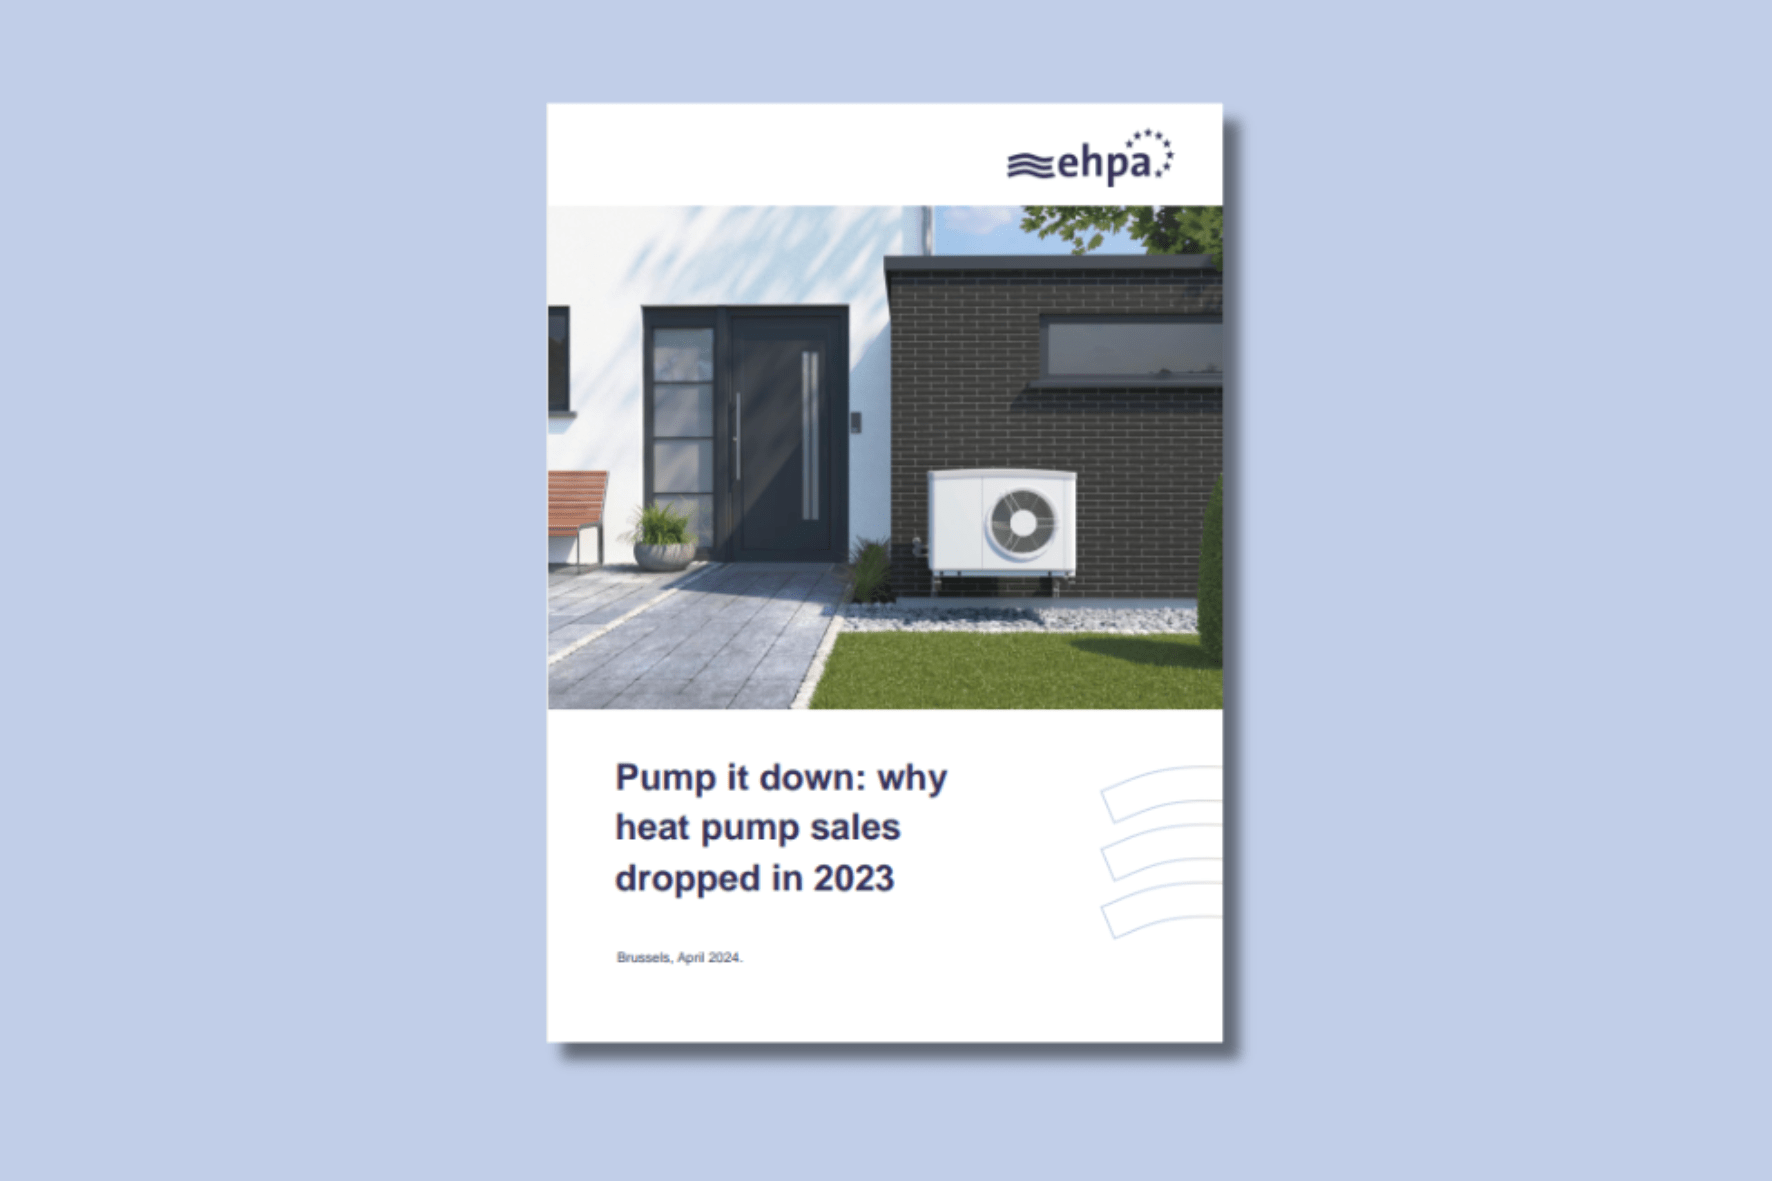 Pump it down: why heat pump sales dropped in 2023 